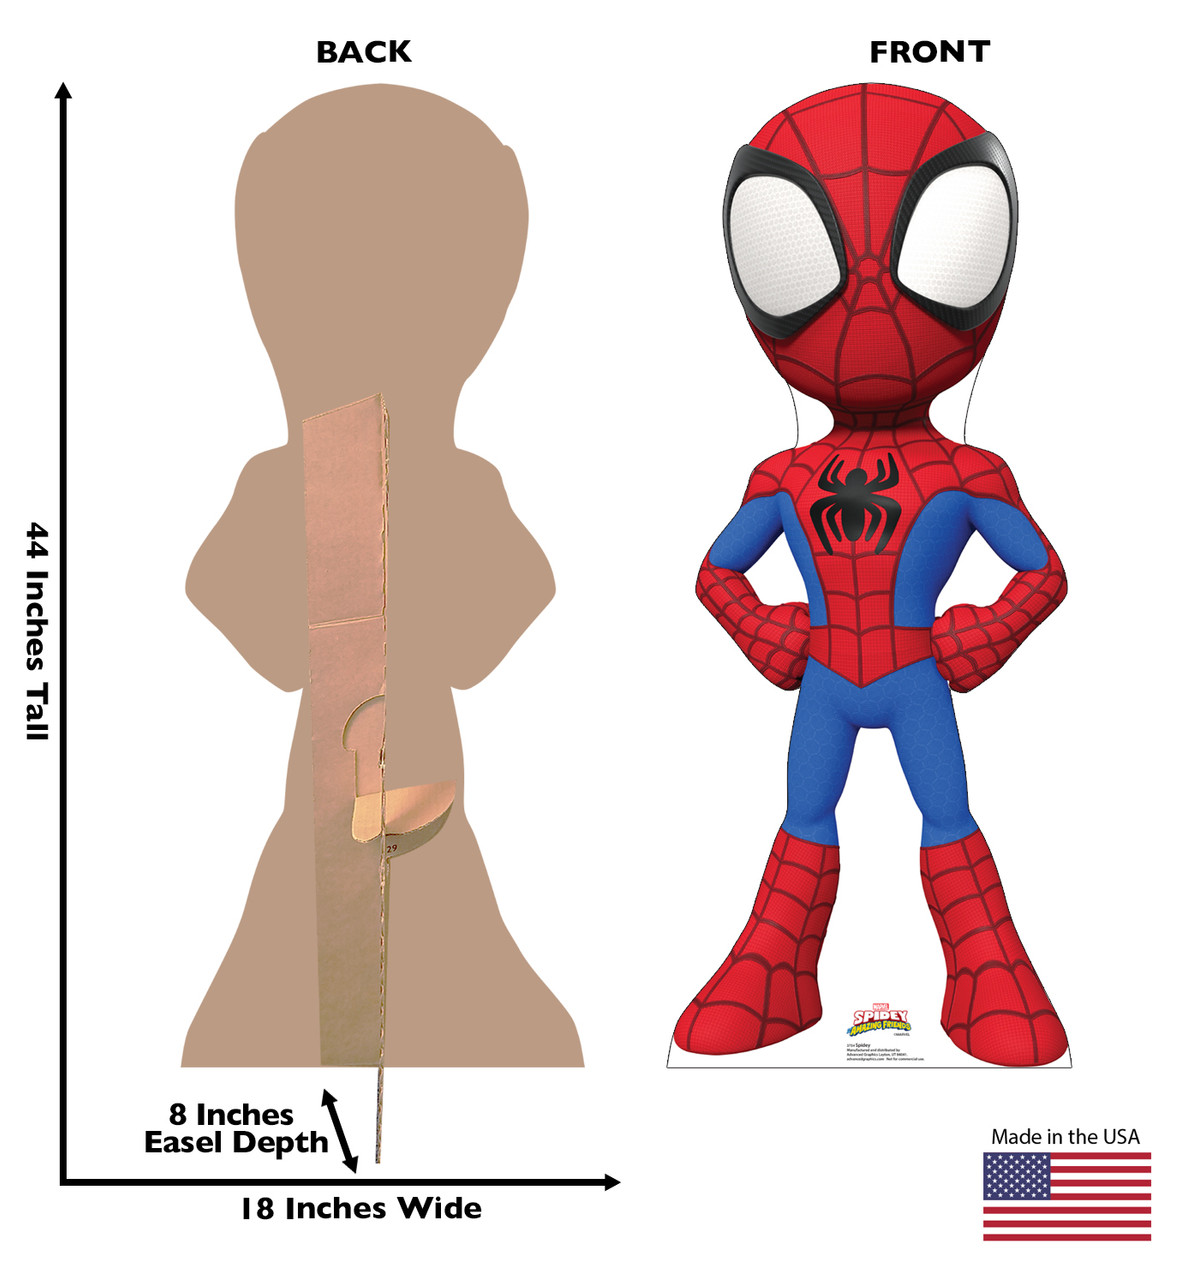 Life-size cardboard standee of Spidey with front and back dimensions.